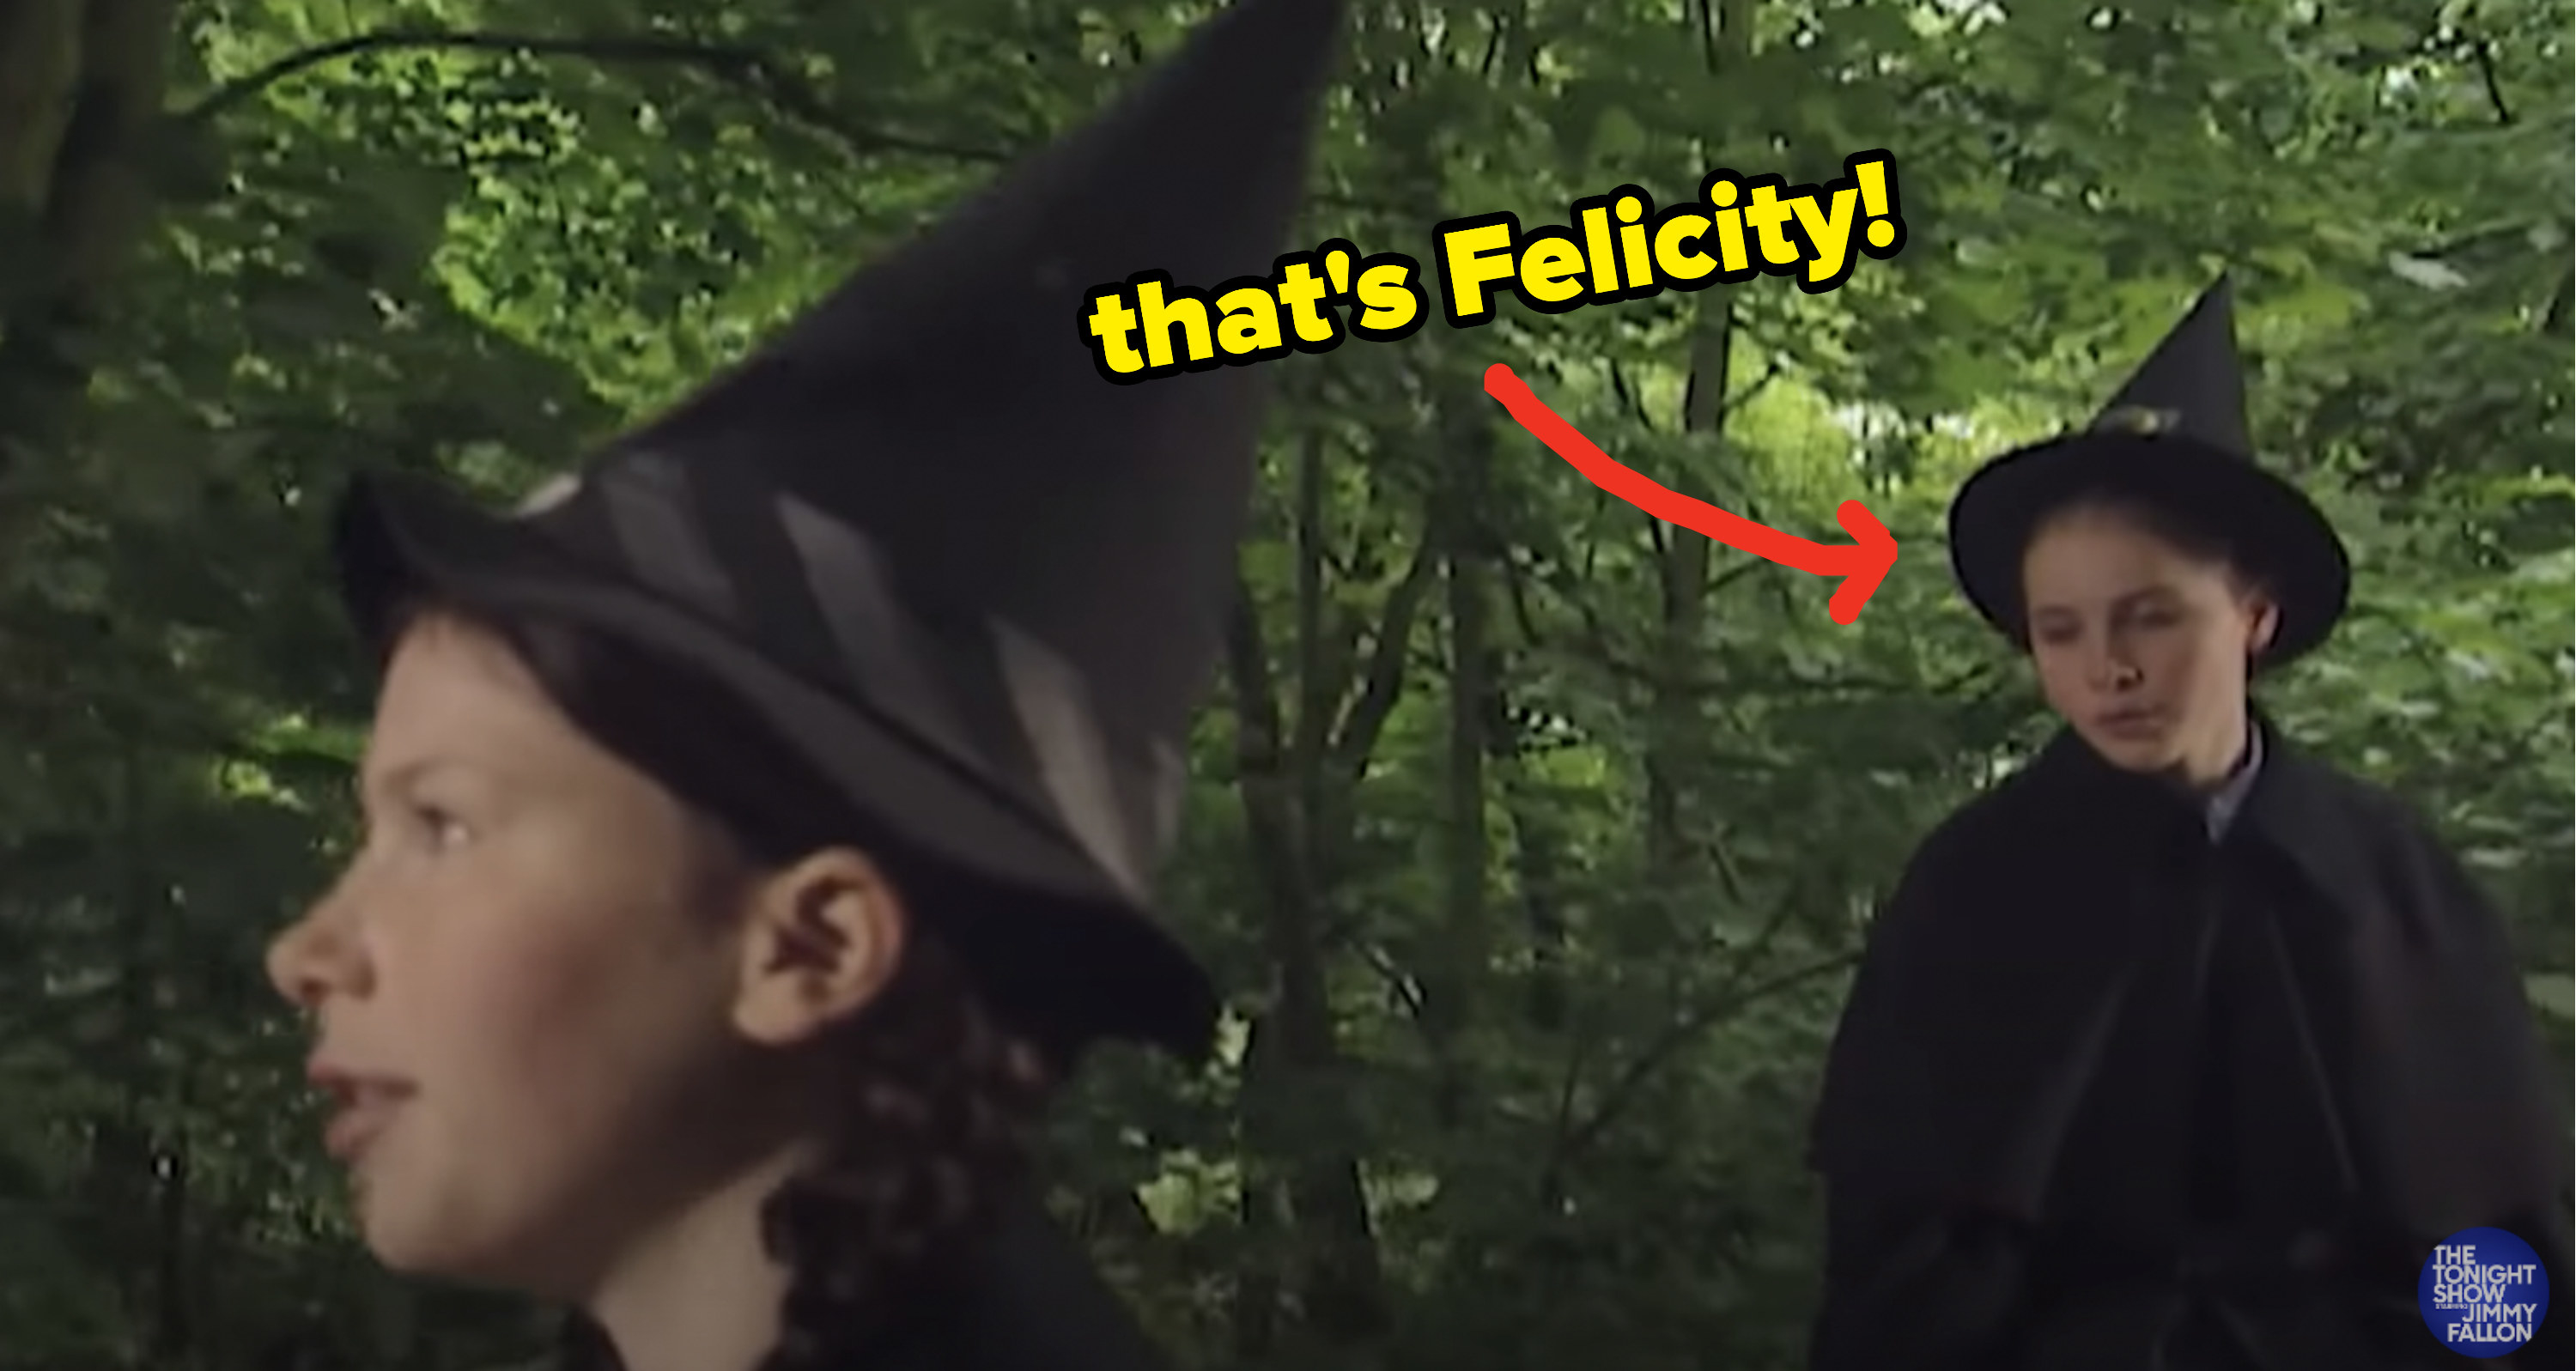 arrow pointing to felicity in a witch outfit